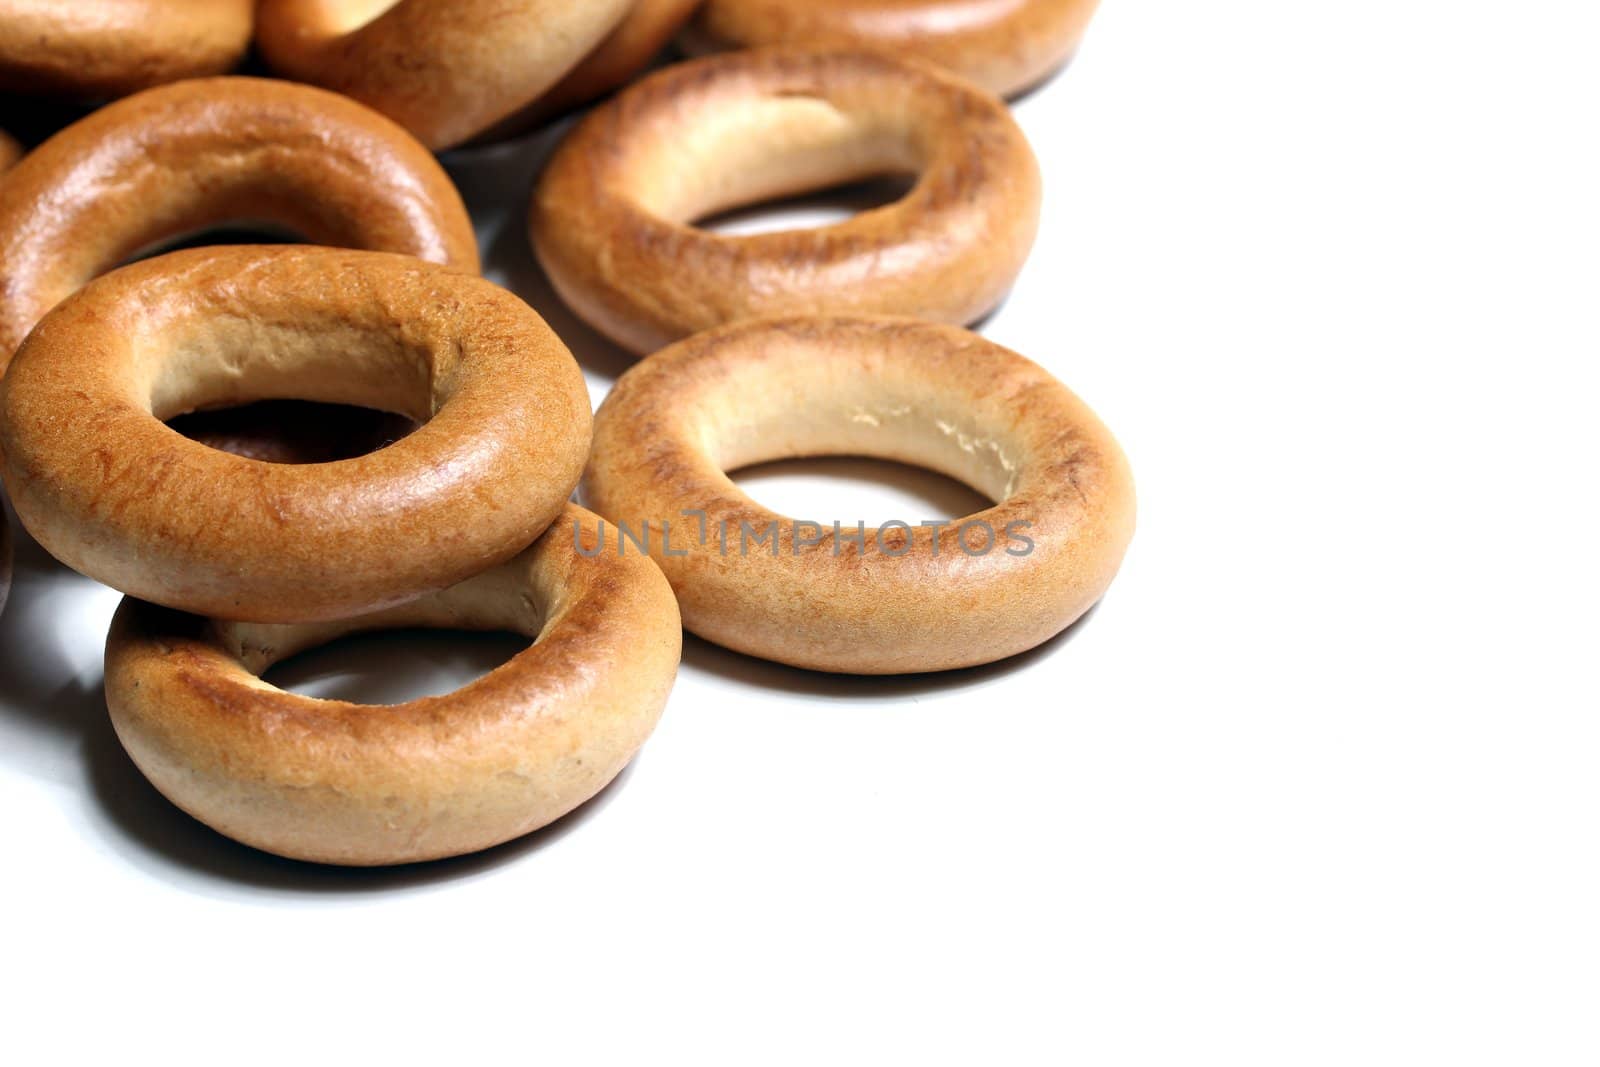 isolated pastry rings